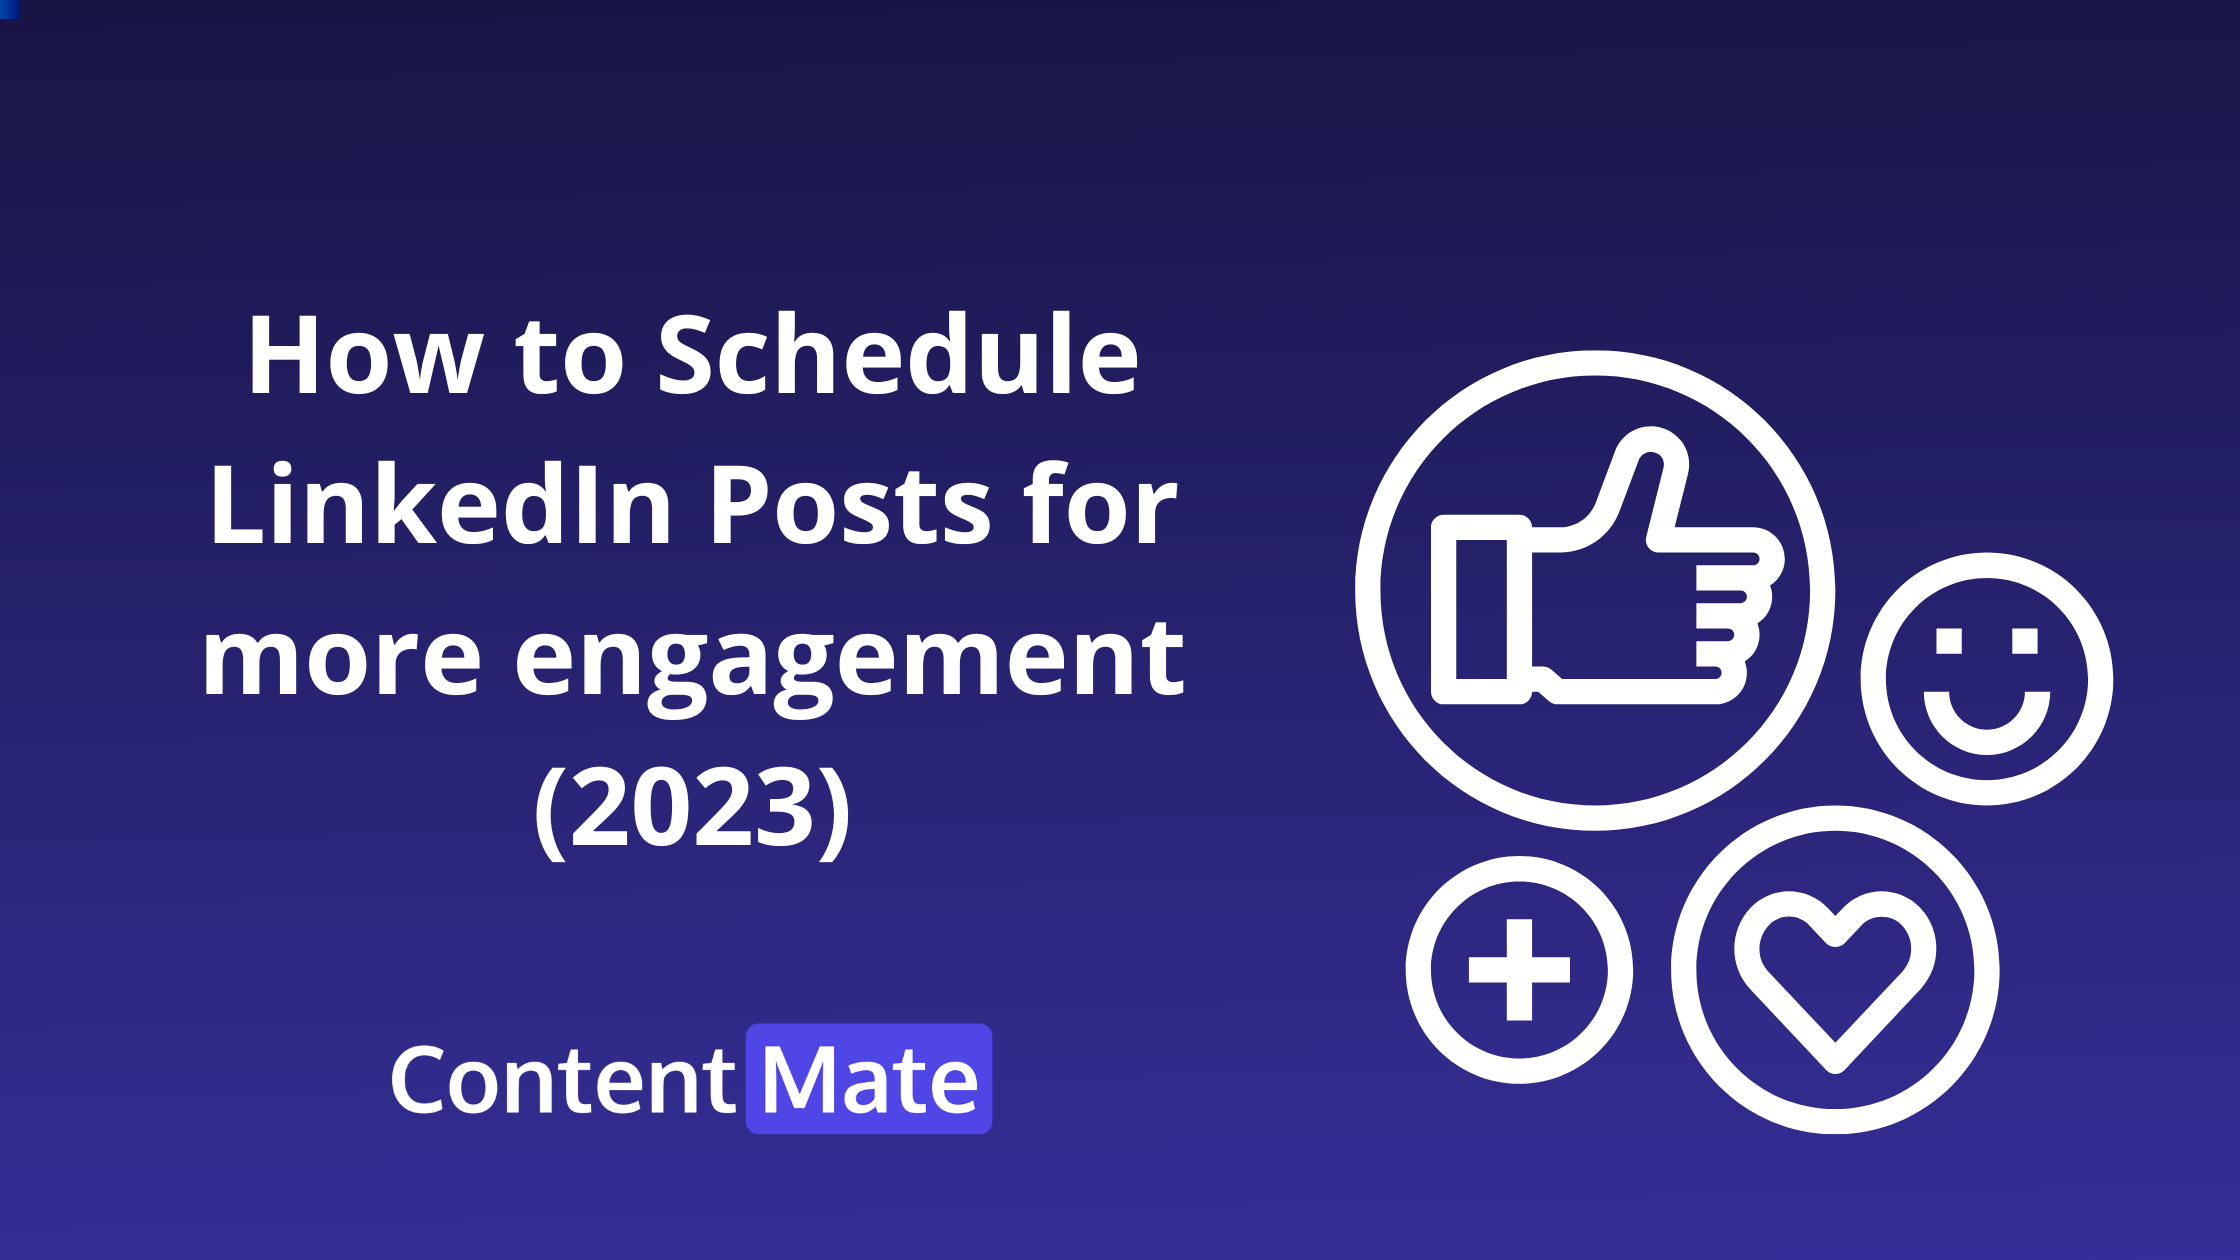 How to Schedule LinkedIn Posts for more engagement (2023)